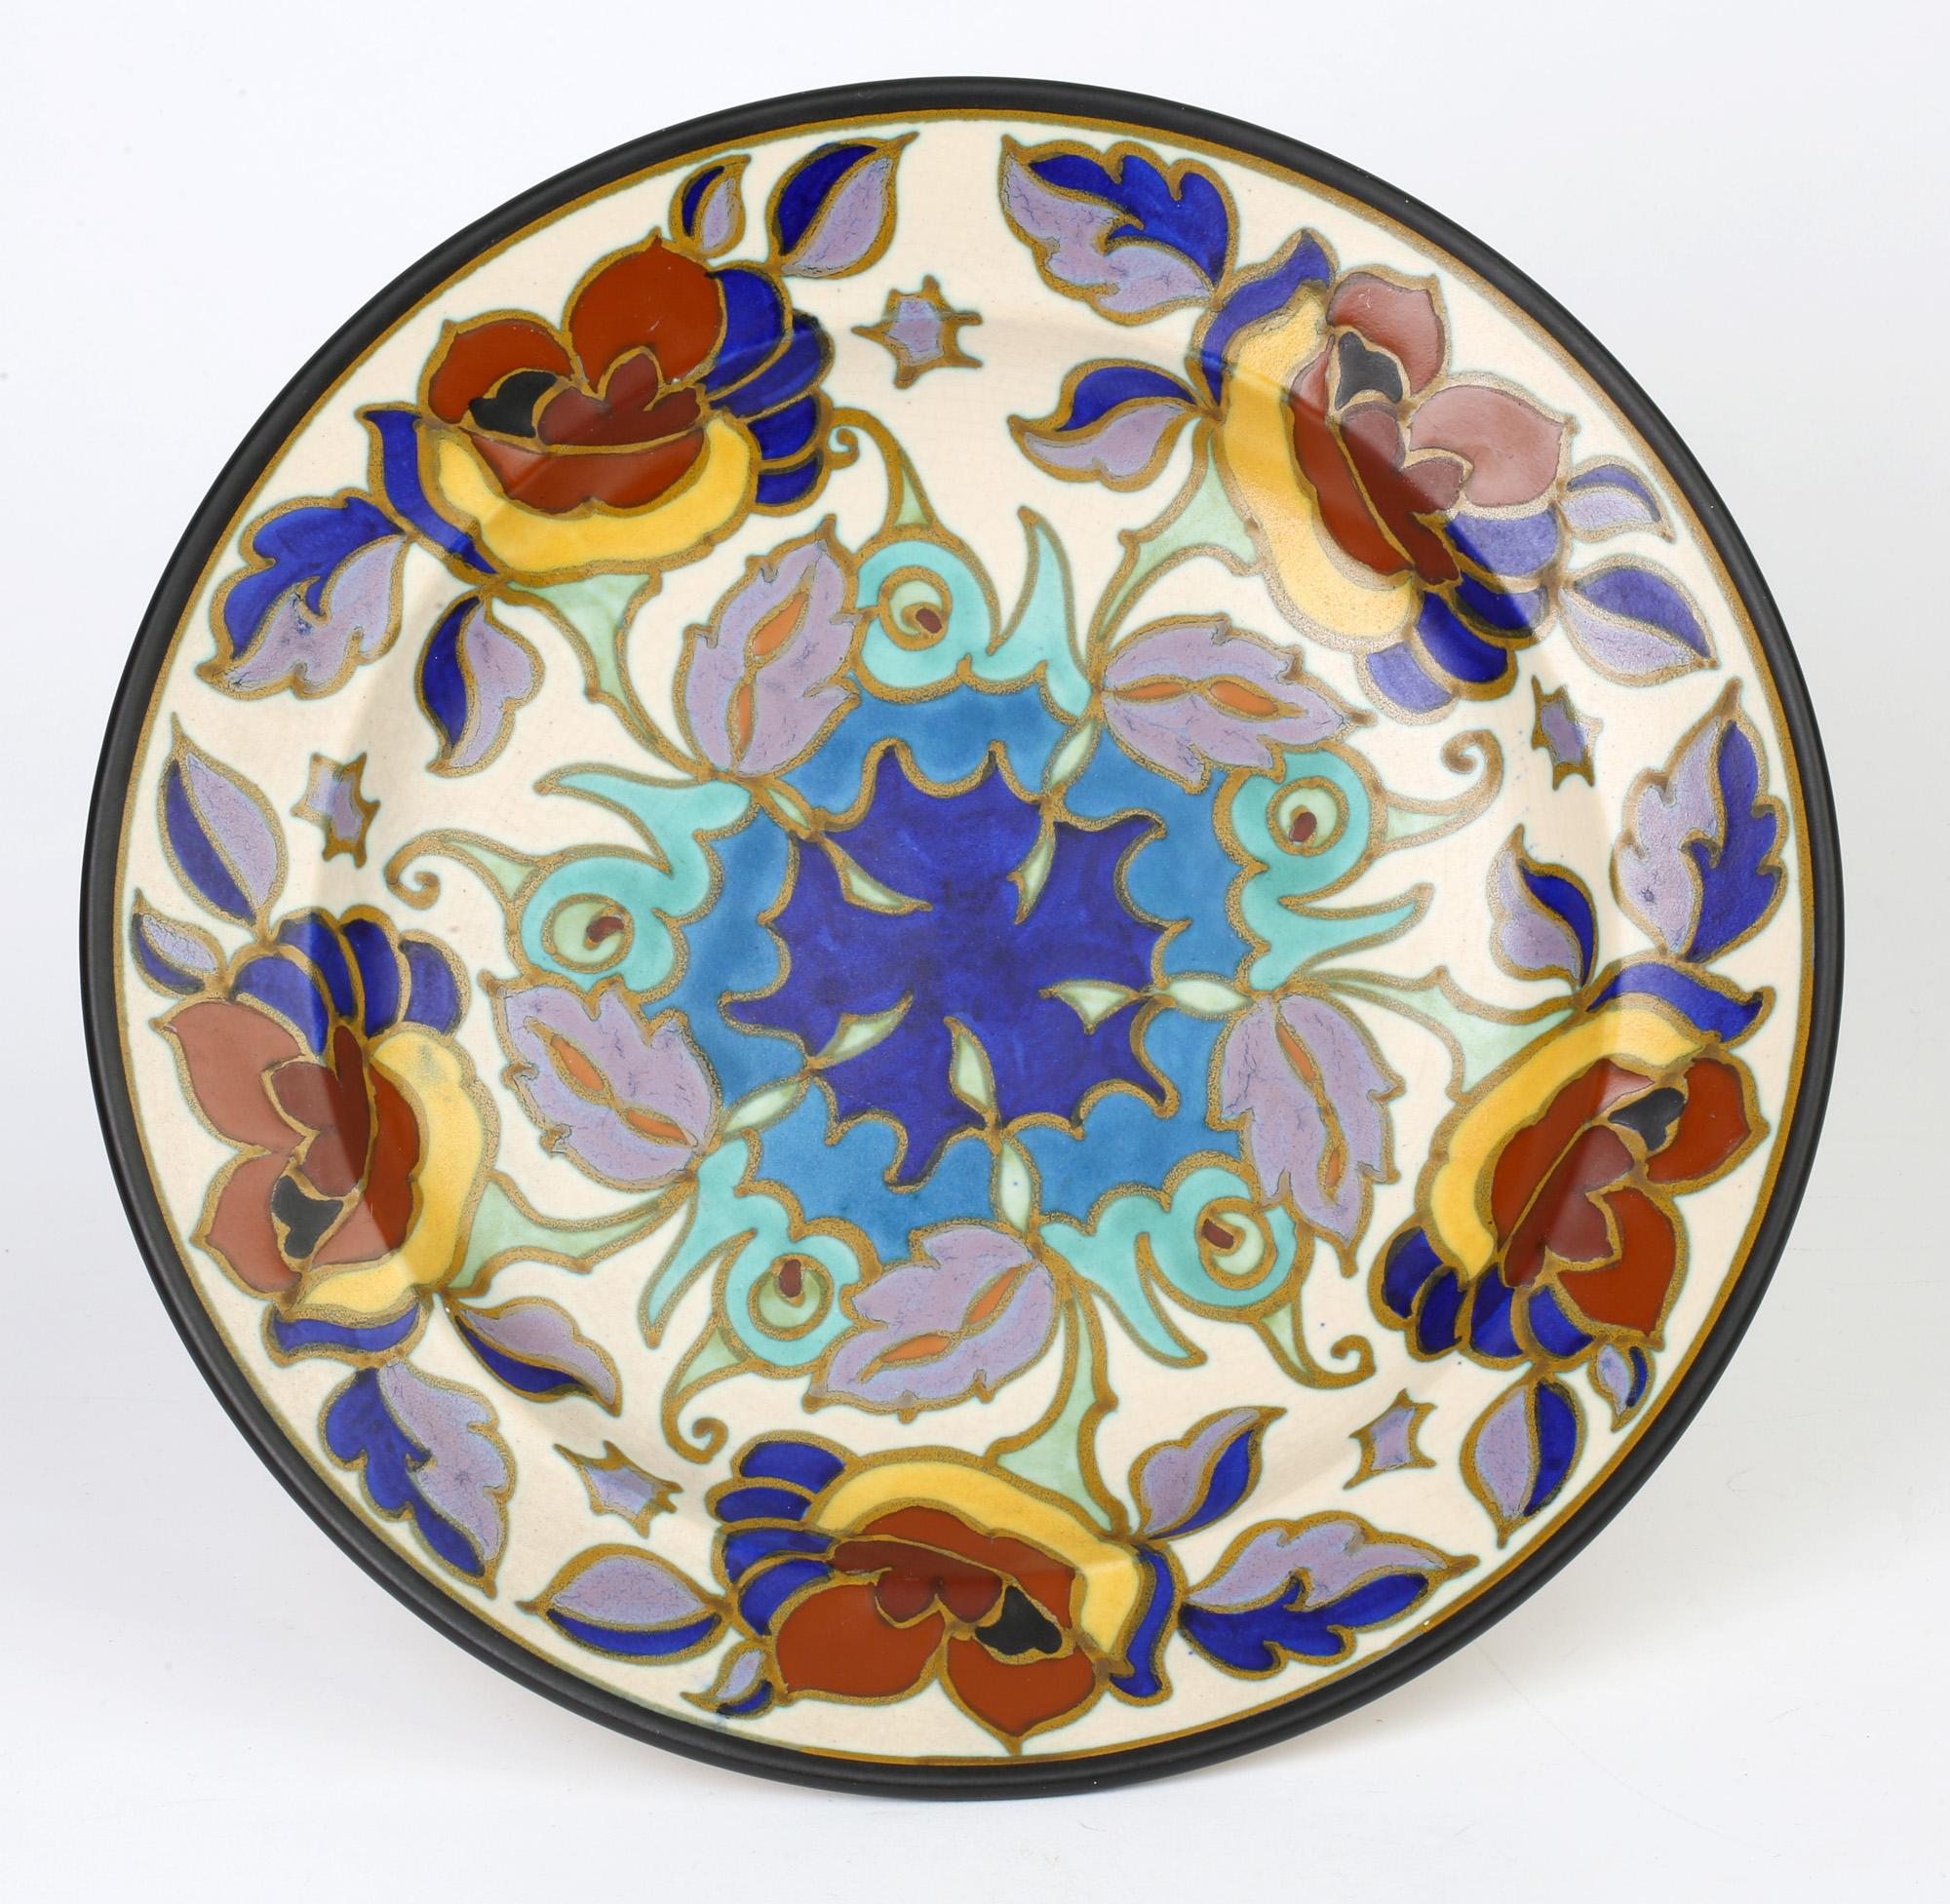 A stunning Dutch Gouda, Plateelbakkerij Zuid-Holland Art Deco pottery wall plate hand painted in the Art Nouveau inspired Gaberone design and believed to date between 1920 and 1929. The rounded bowl shaped plaque is body painted with a central